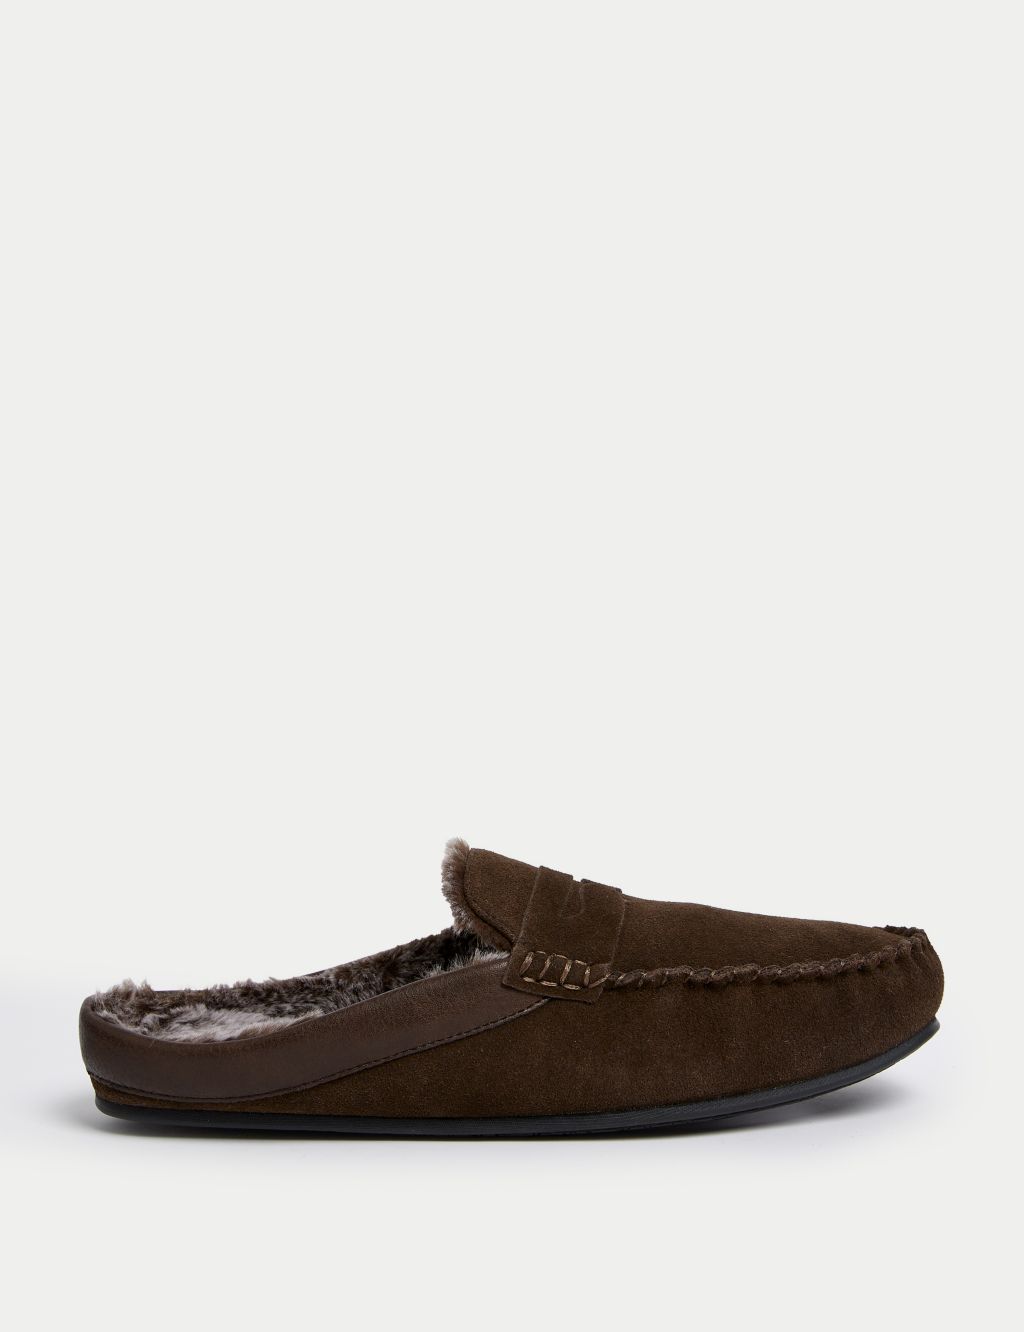 Suede Mule Moccasins 3 of 4